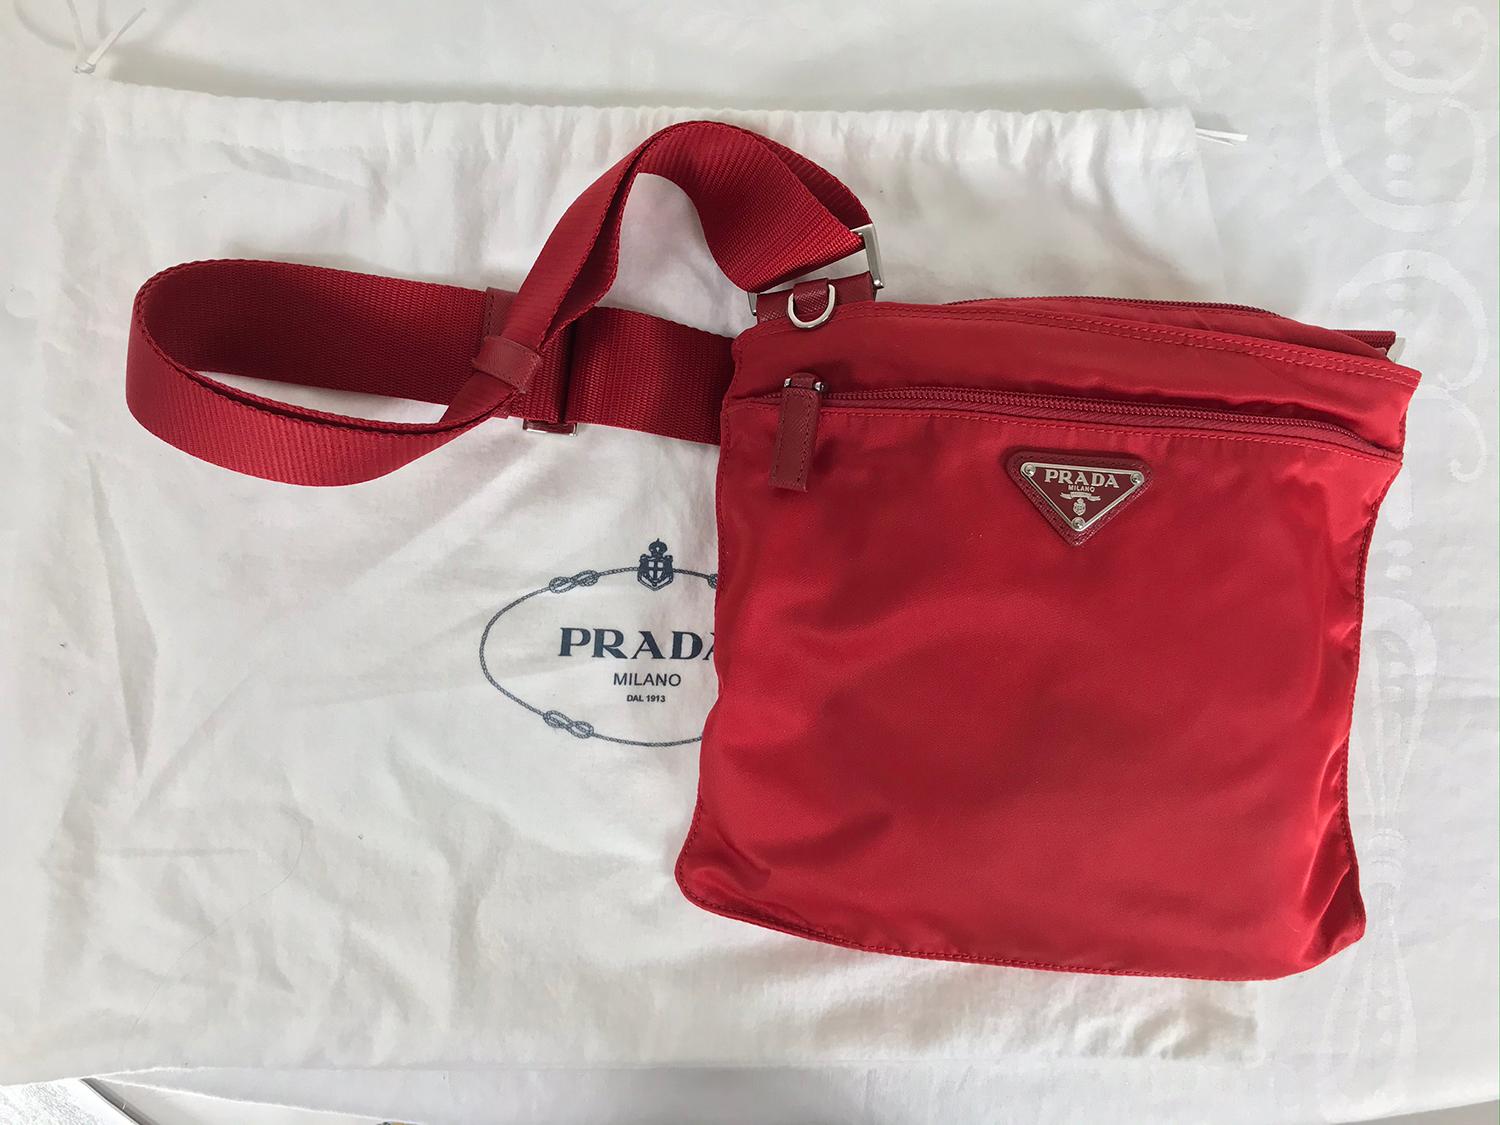 Prada small nylon cross body handbag in red. This bag looks barely, if ever, used, with the protector bag. Nylon pouch with outside zipper compartment, leather zipper pull tab. Prada silver triangle logo at the front, Prada metal tag inside in red